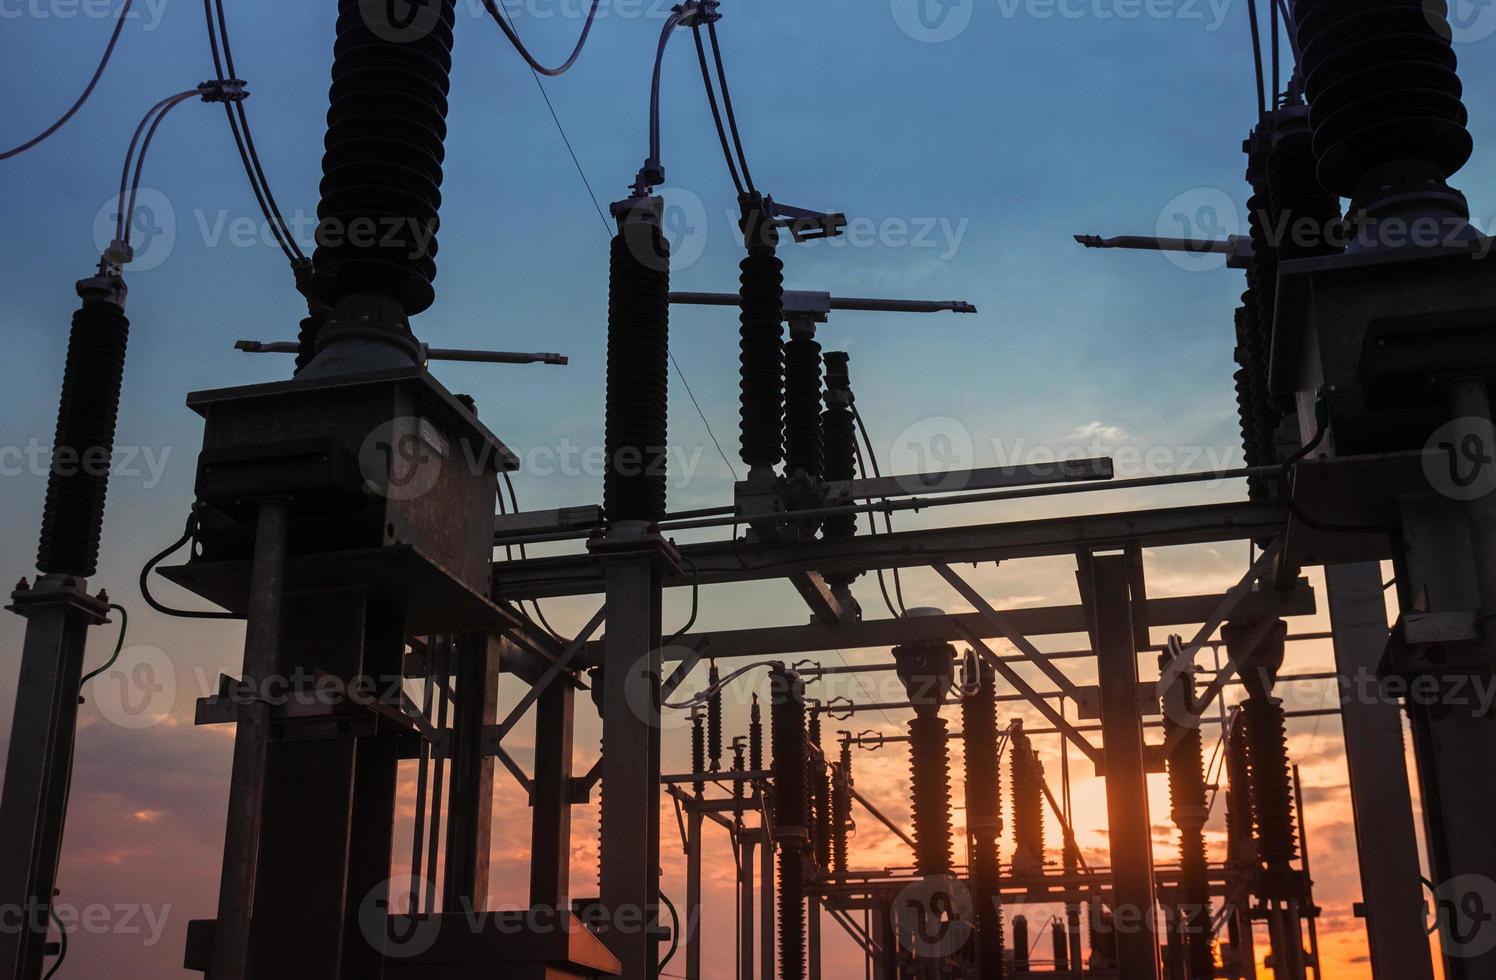 Electricity Authority Station, power plant, energy concept, evening sky photo